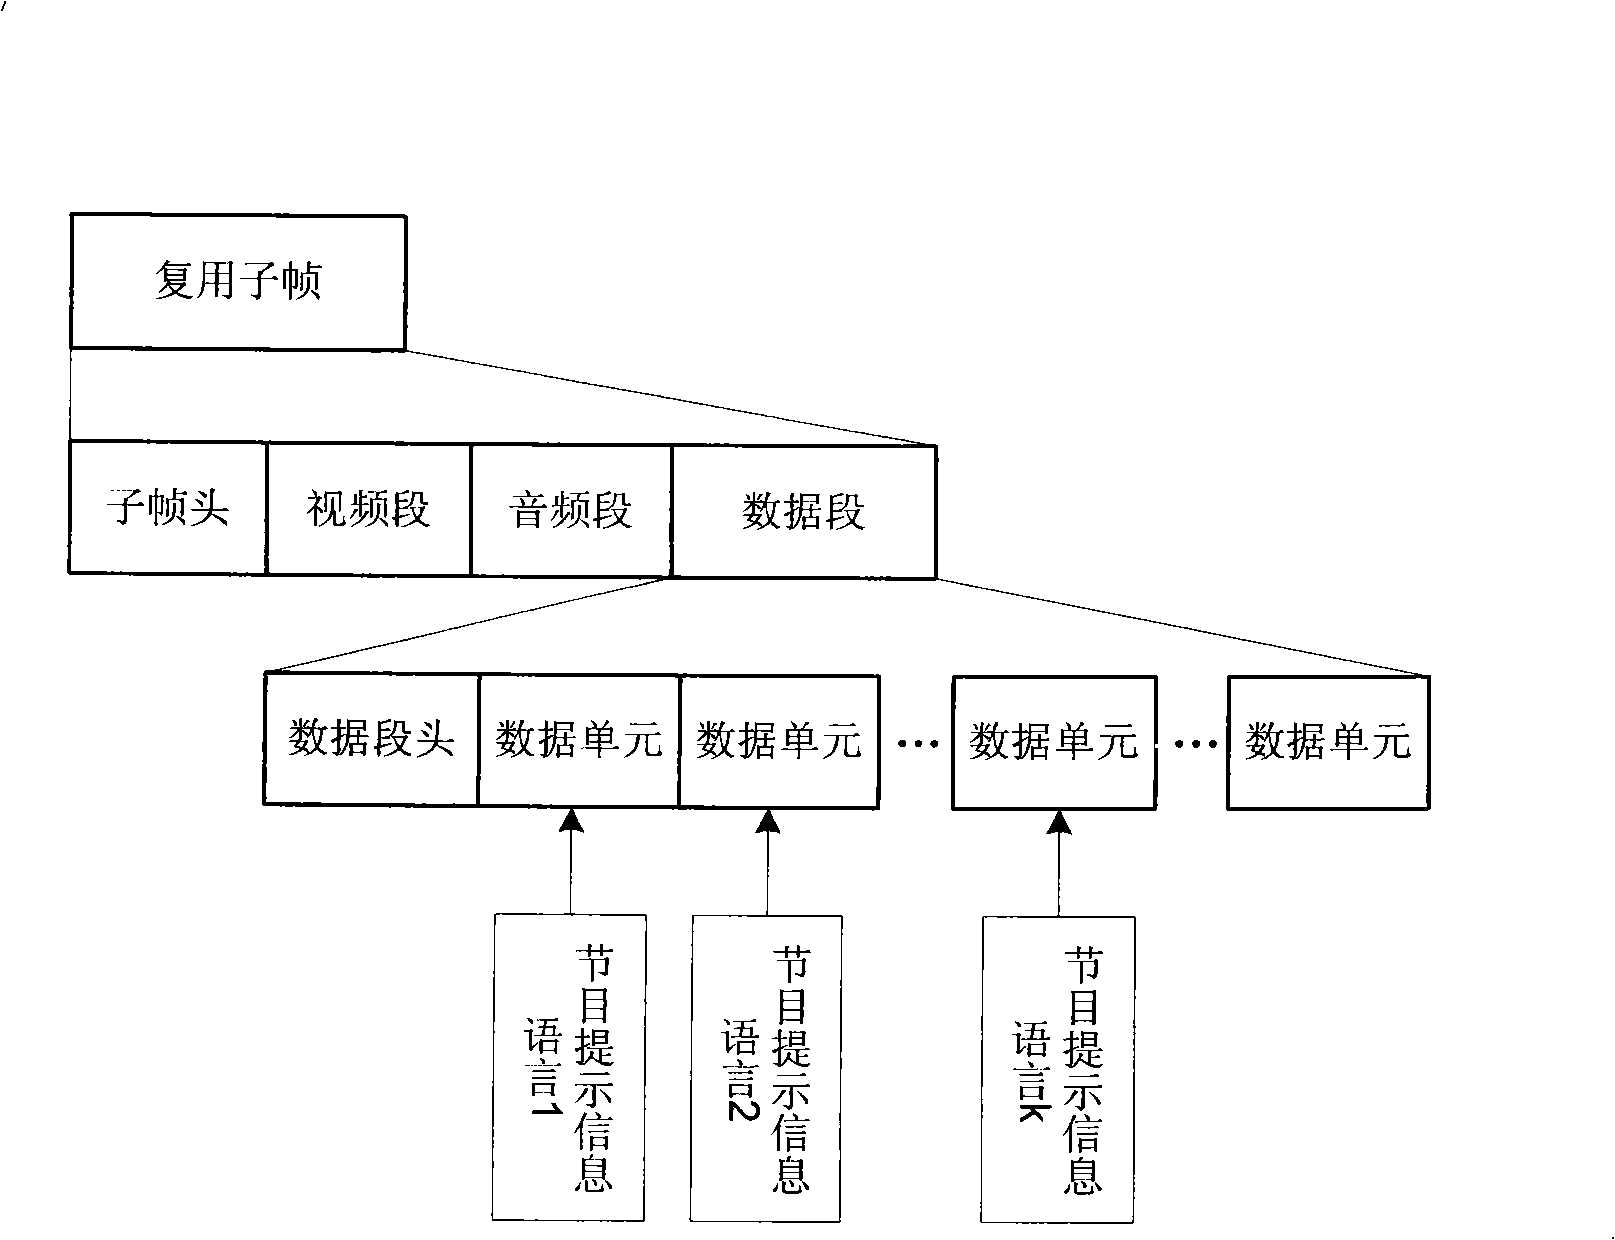 A transmission method and system for multi-language program prompt message